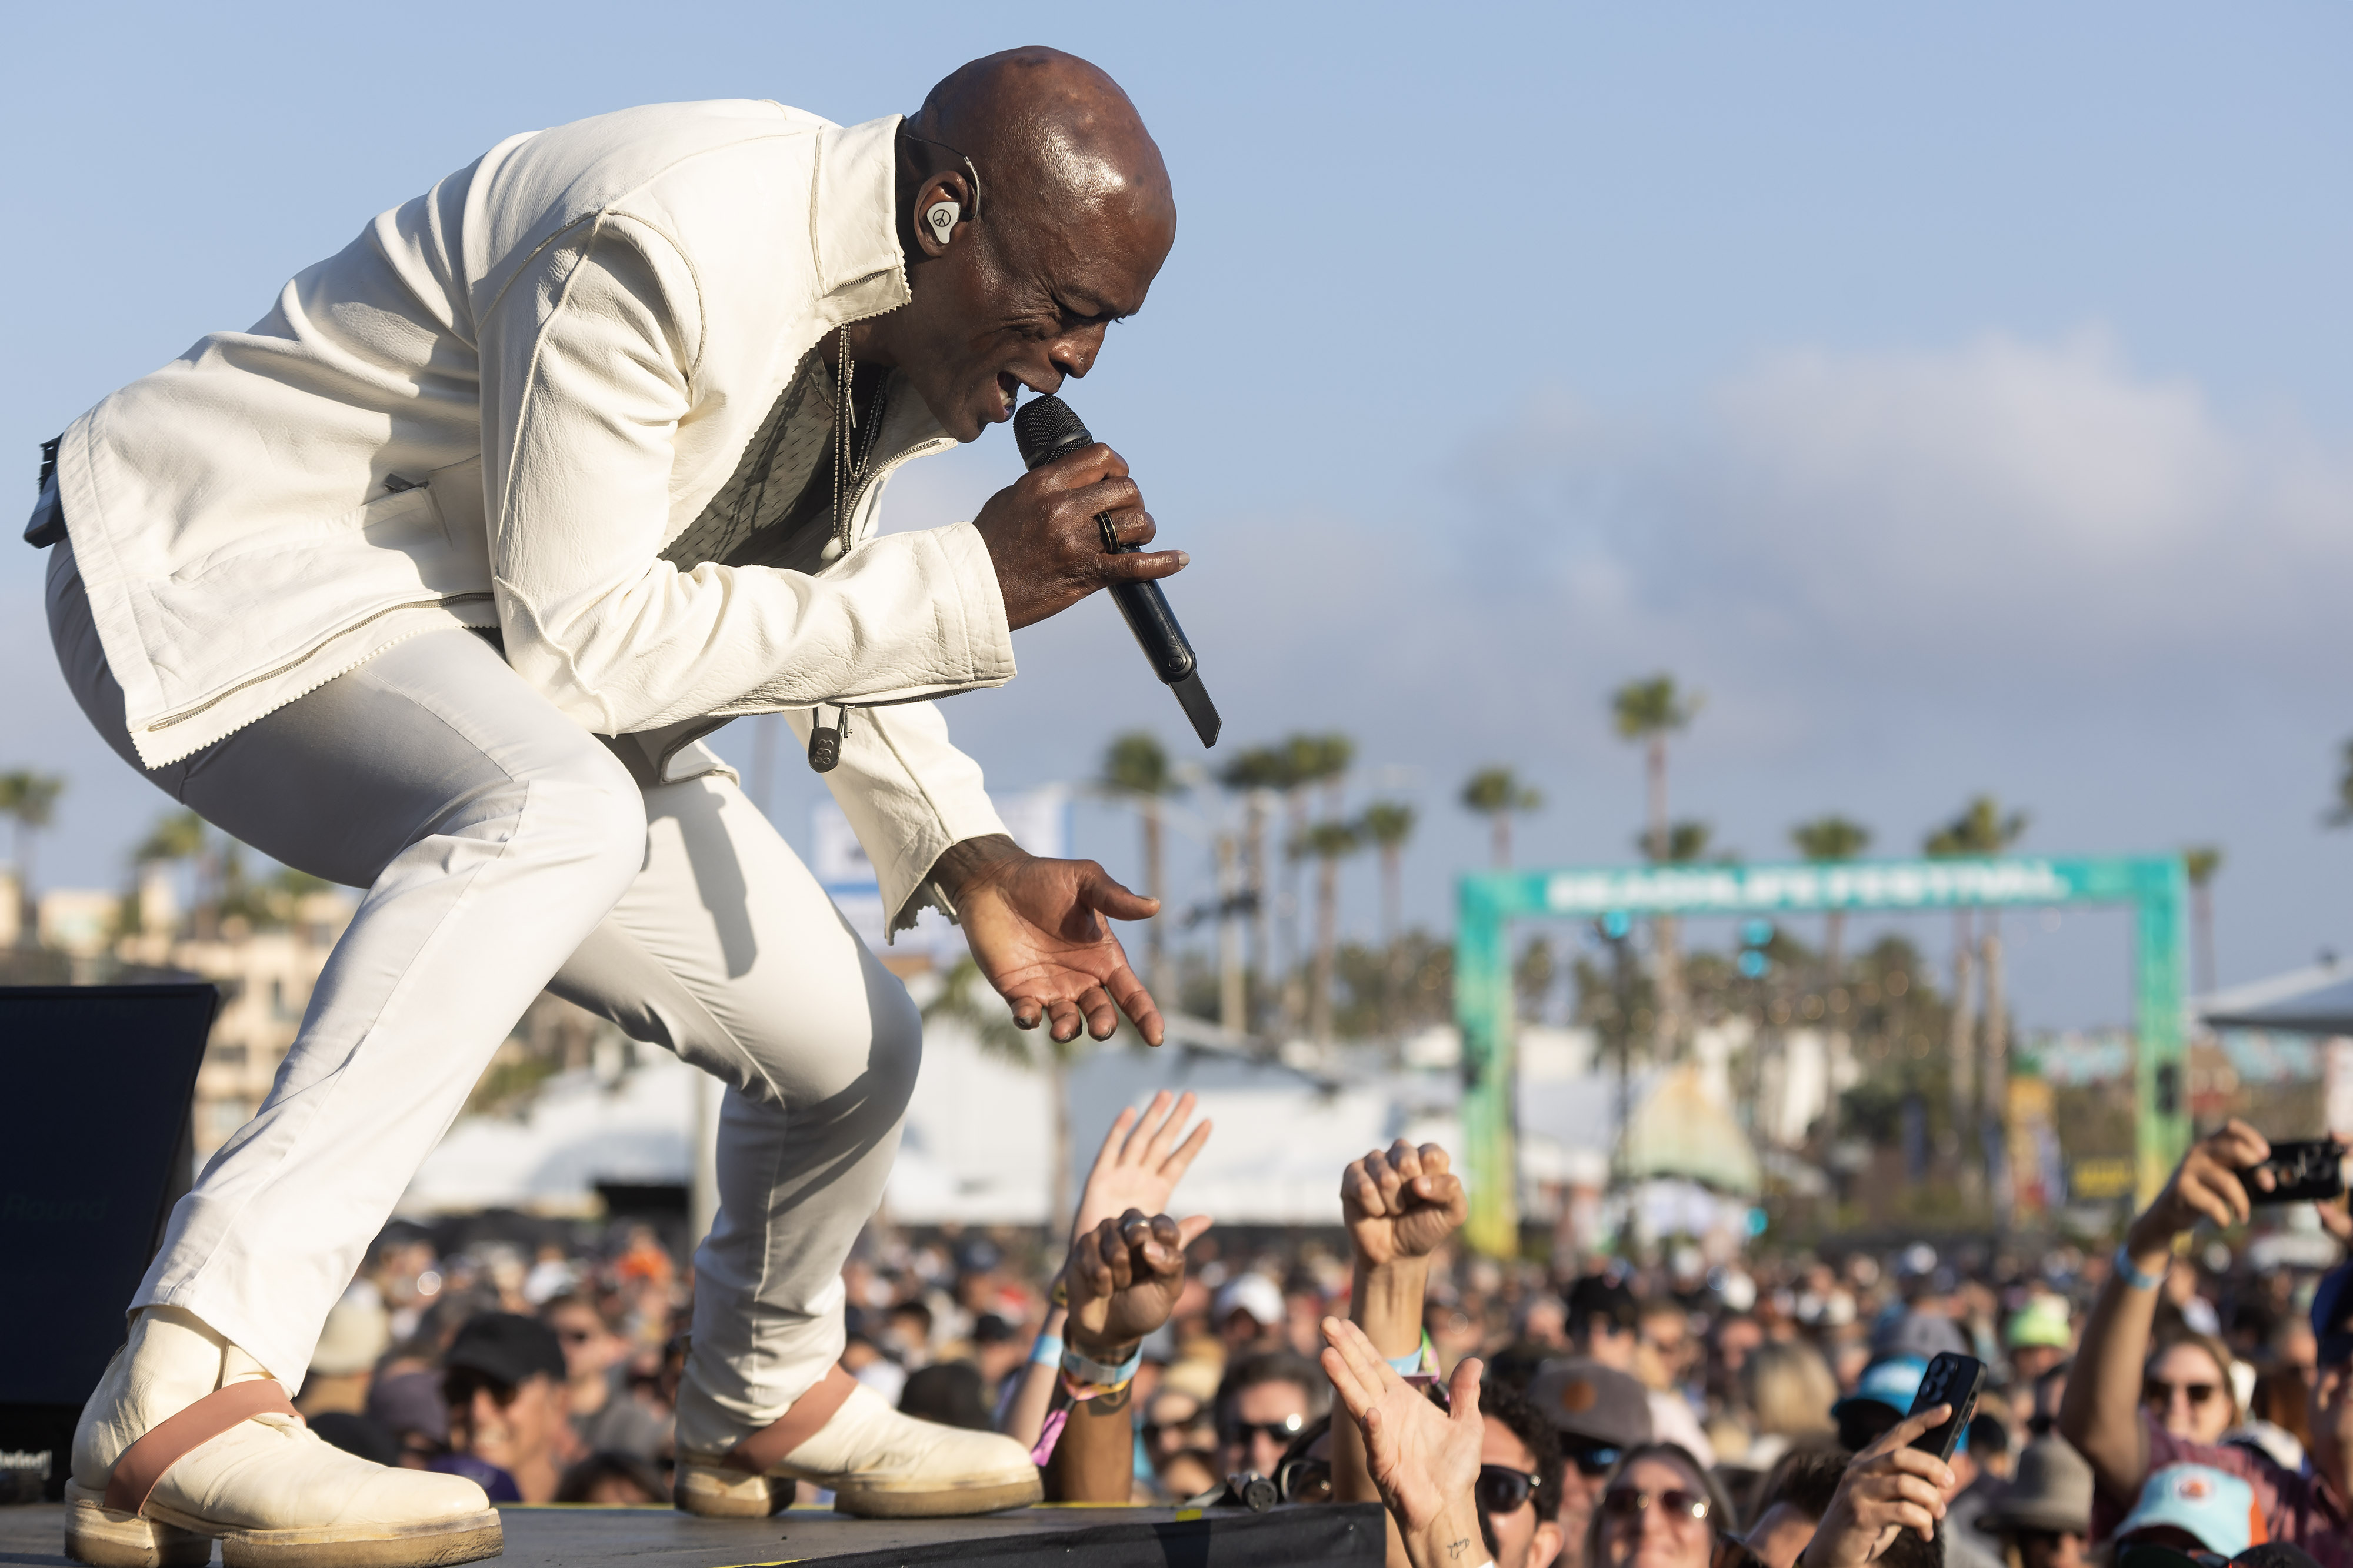 Seal performs on the Hightide stage during the Beachlife music...